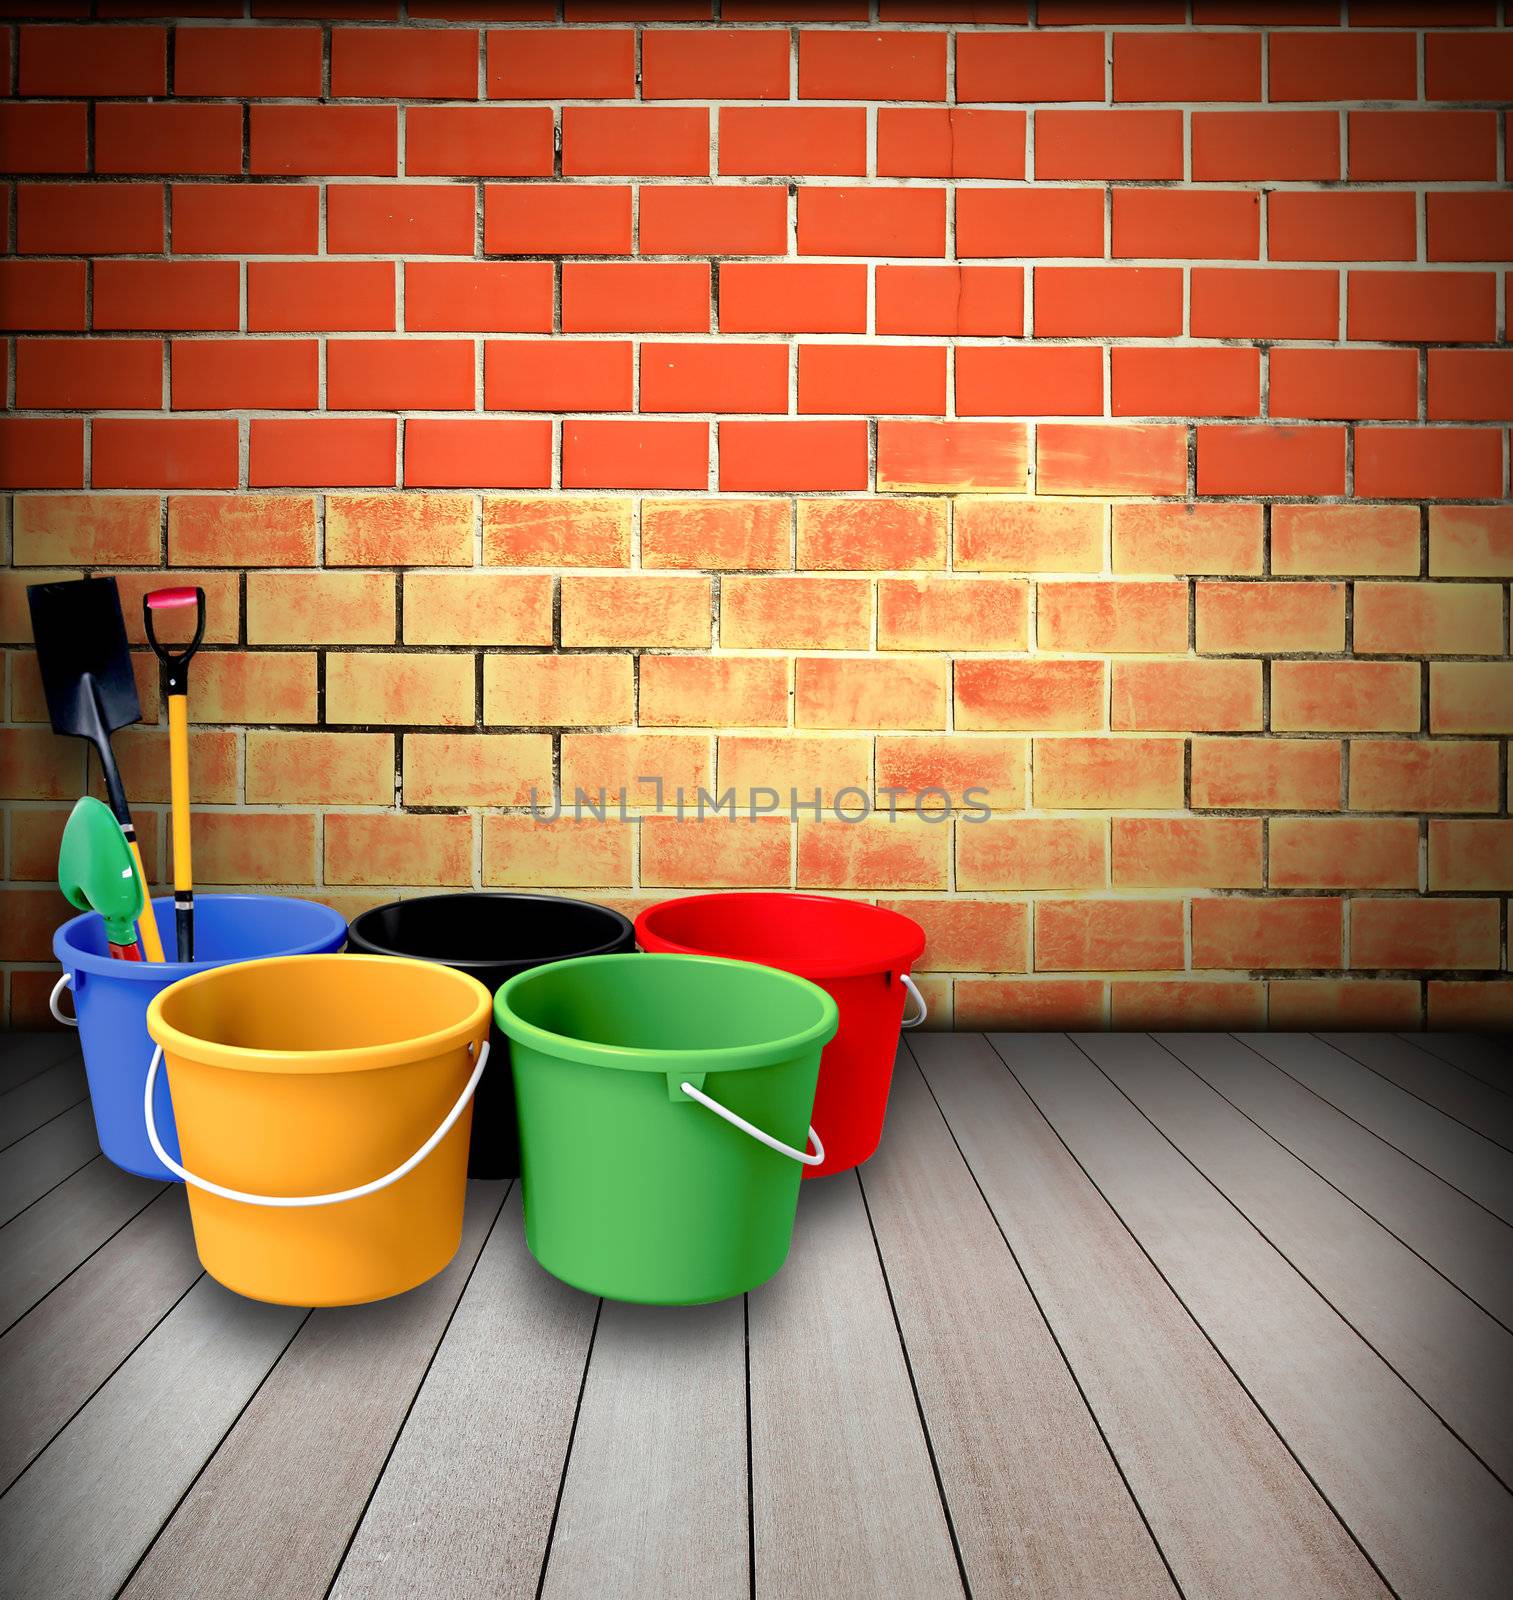 Bucket and shovel with a brick wall.
 by rufous